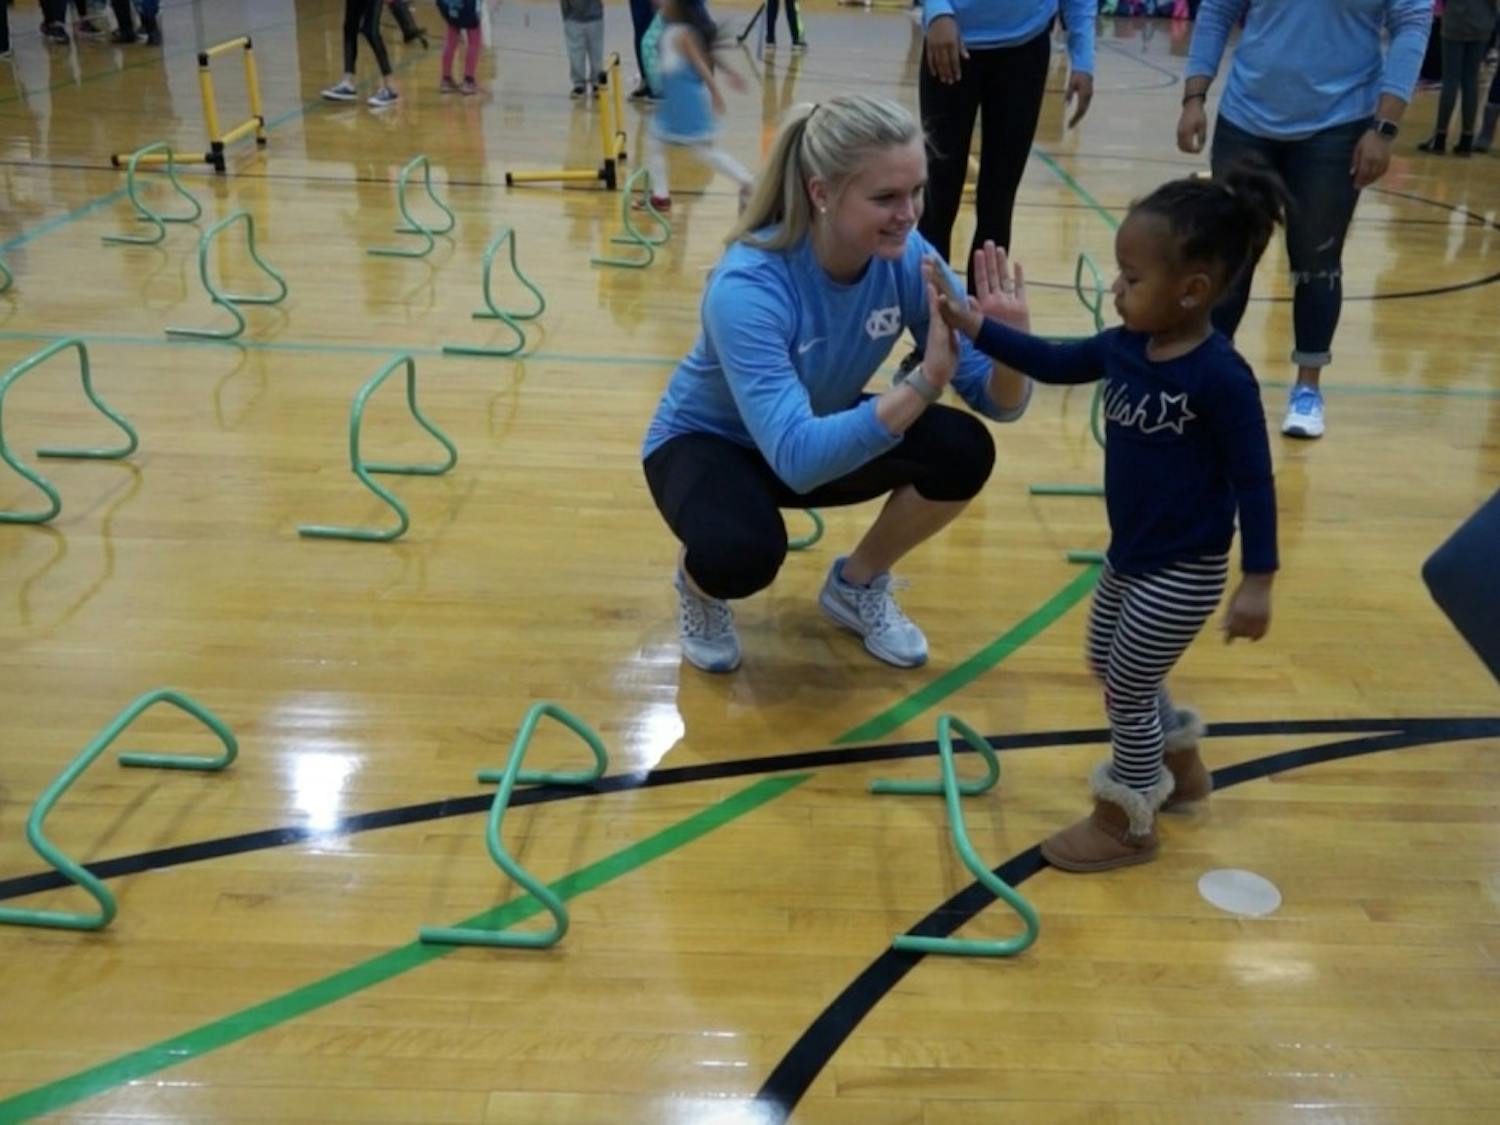 UNC track and field athlete Emily Godwin high fives a participant during National Girls and Women in Sports Day, hosted at UNC.